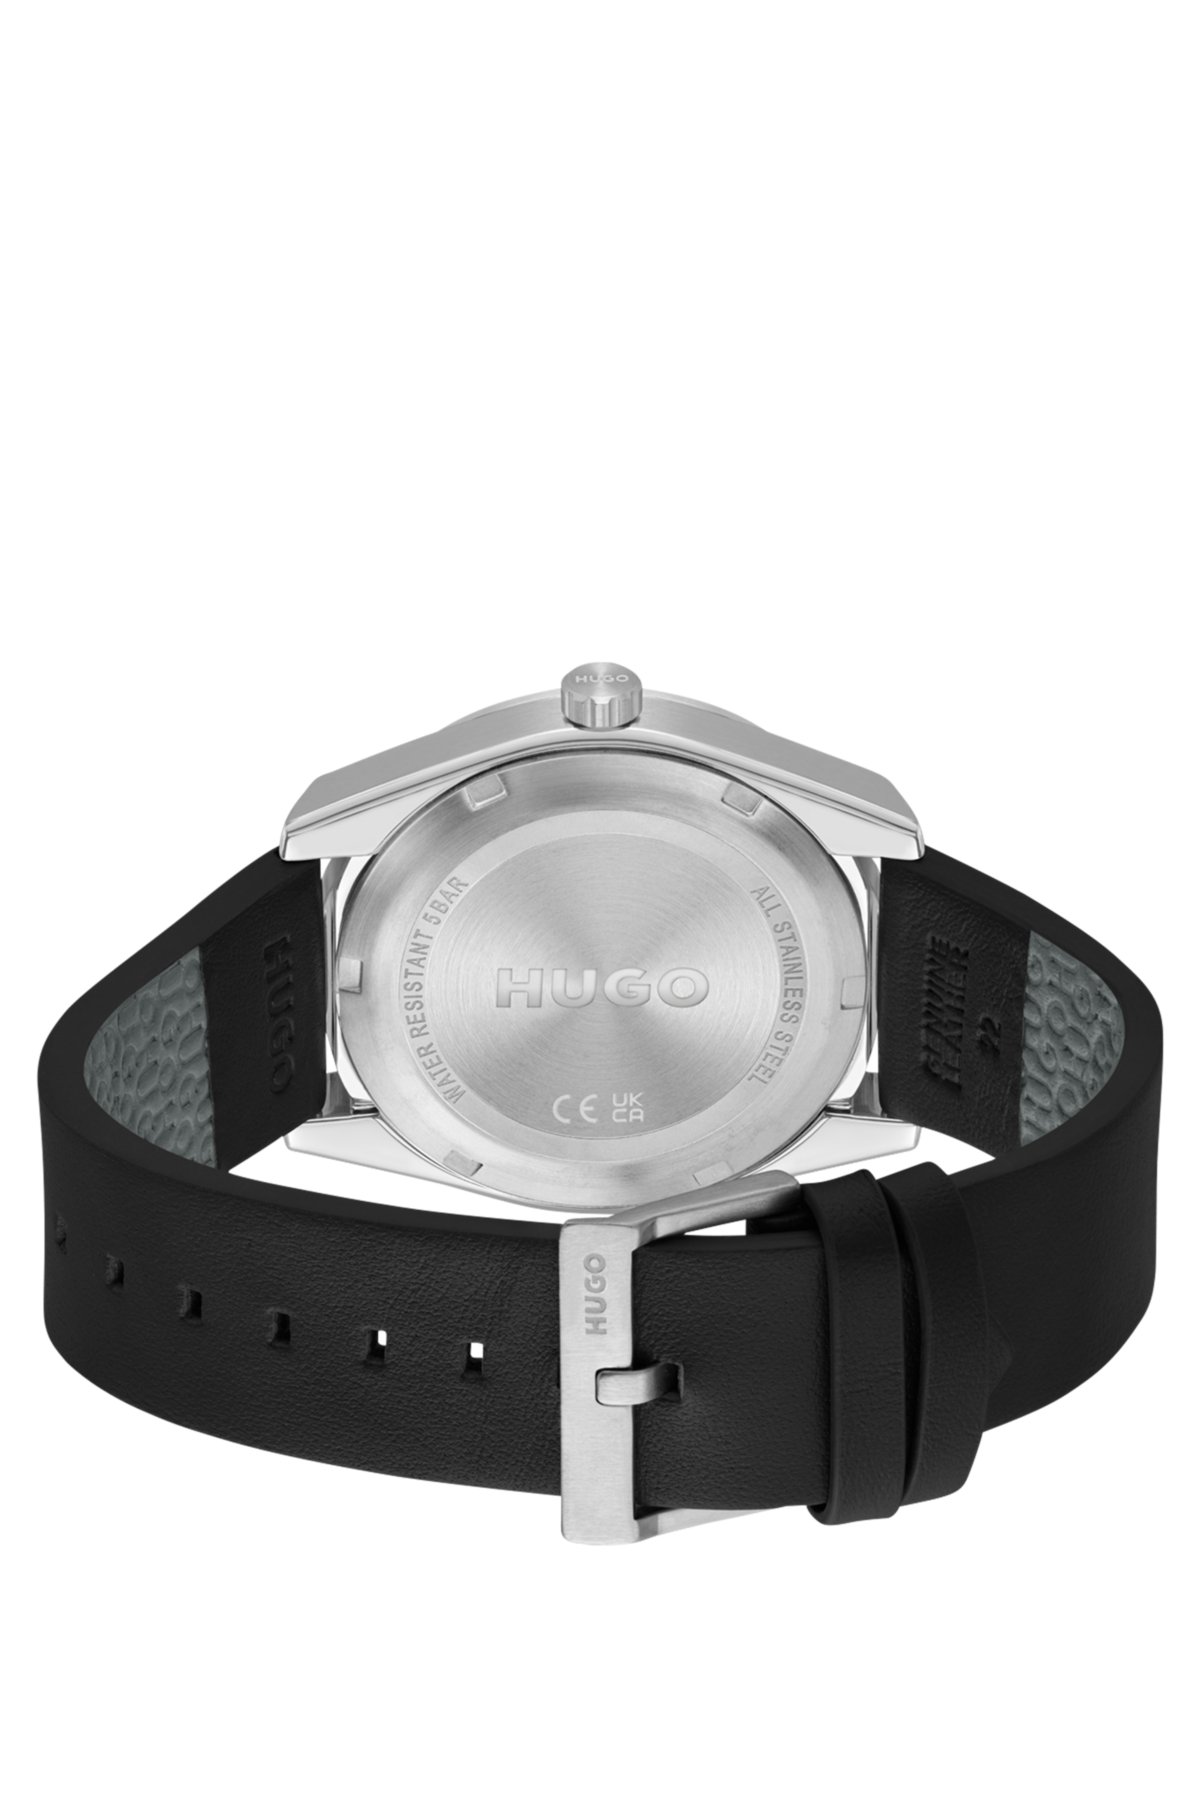 Leather-strap watch with brushed black dial, Black